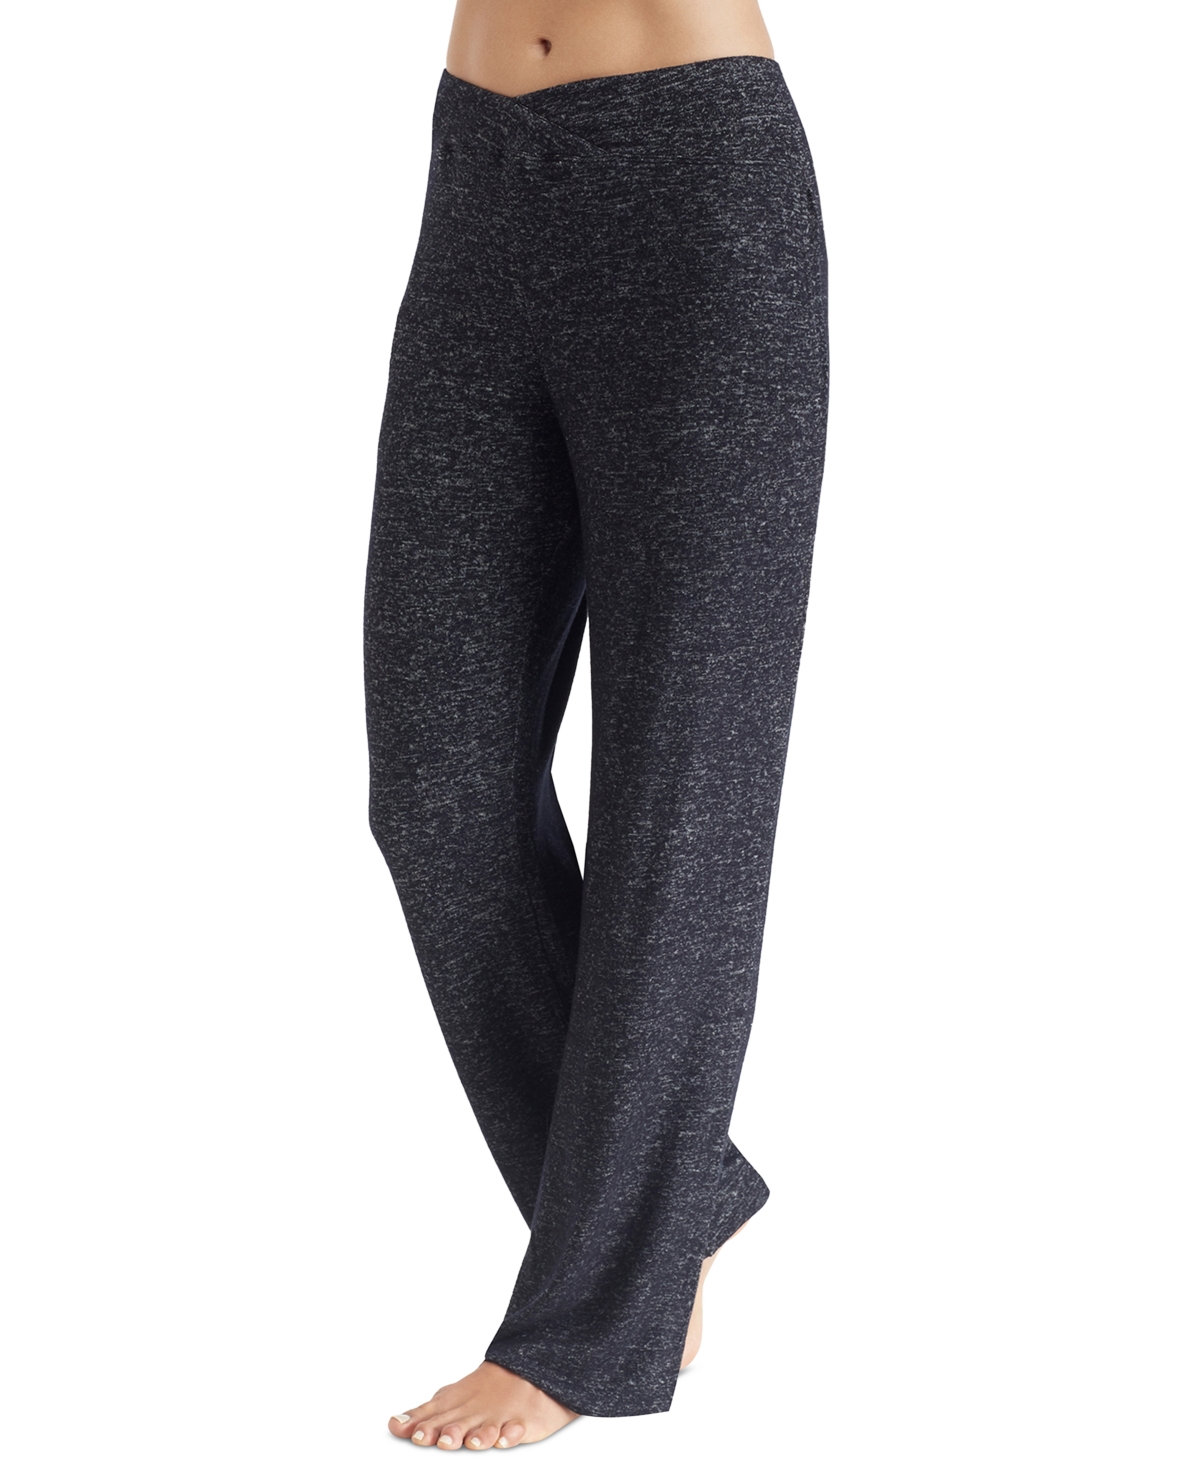 Women's Soft Knit Mid-Rise Lounge Pants - Marled Dark Charcoal